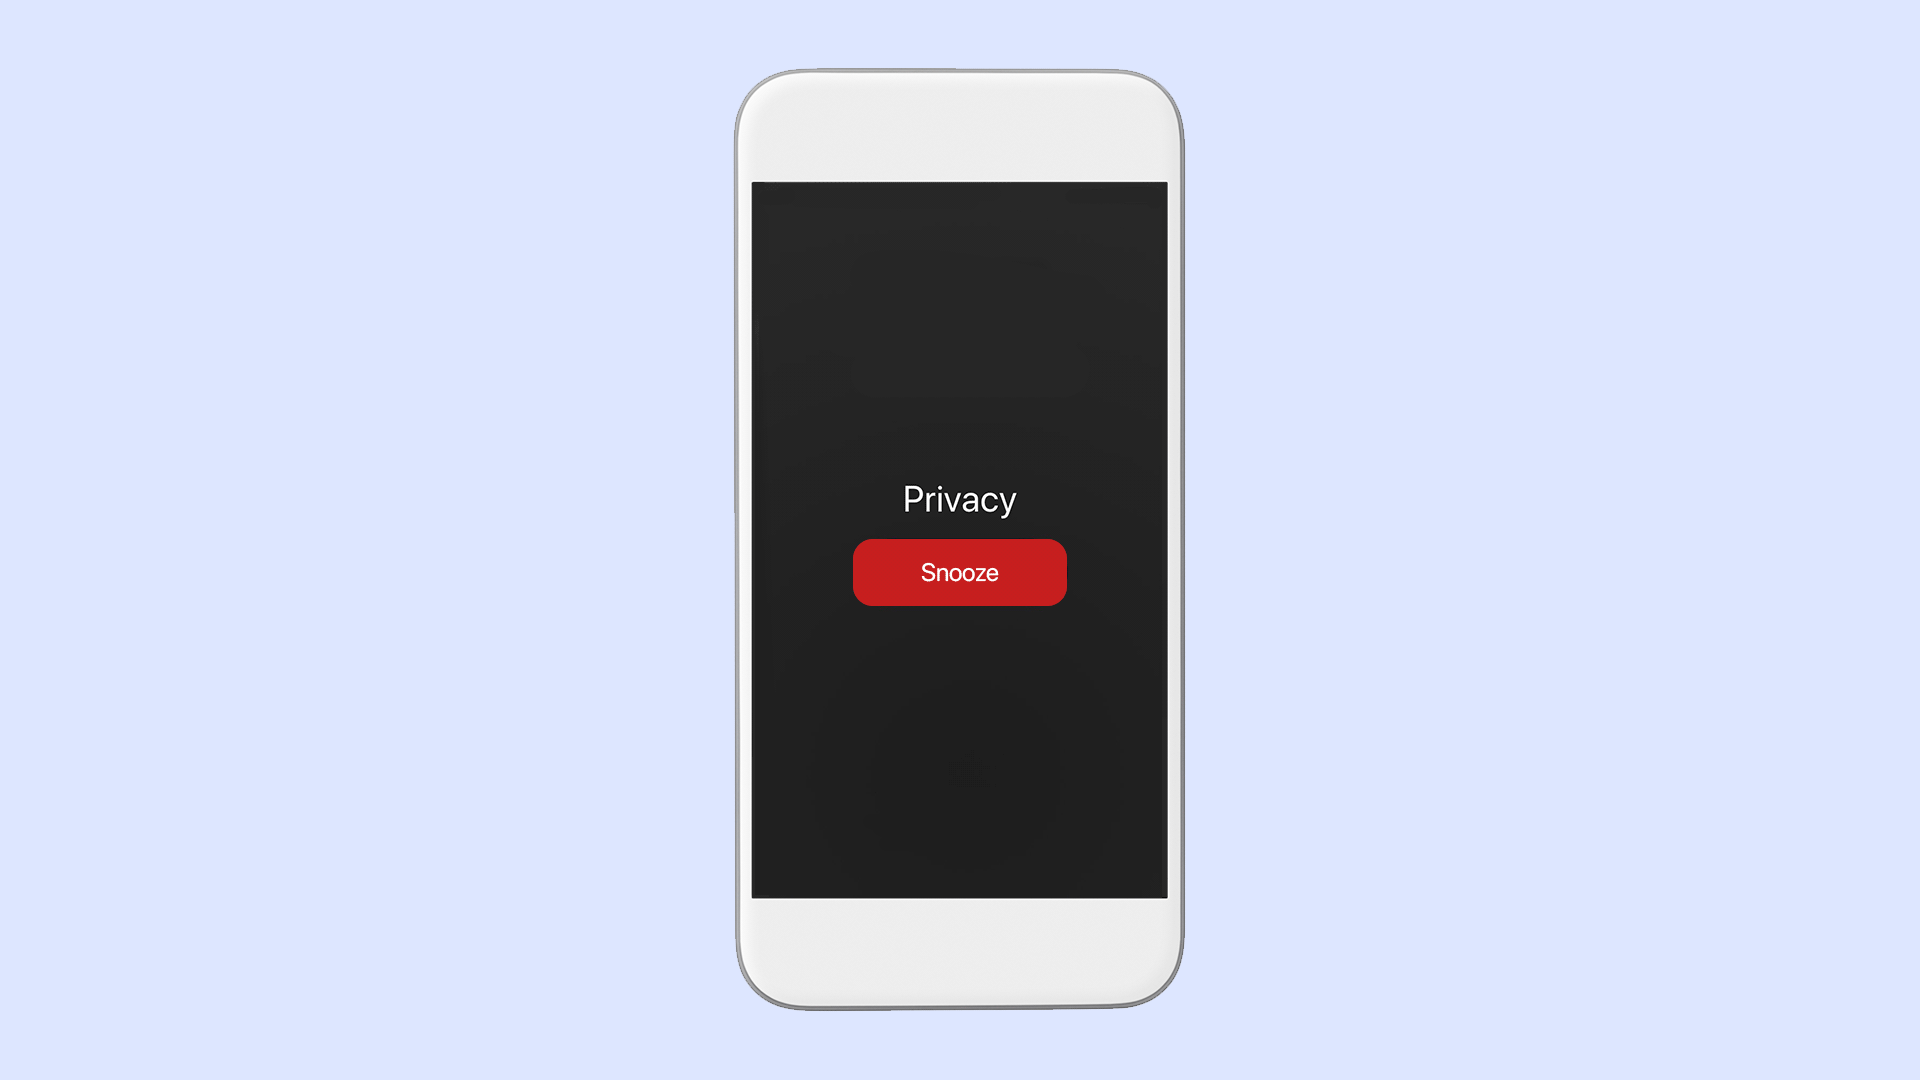 Illustration of Privacy alarm being snoozed on a phone